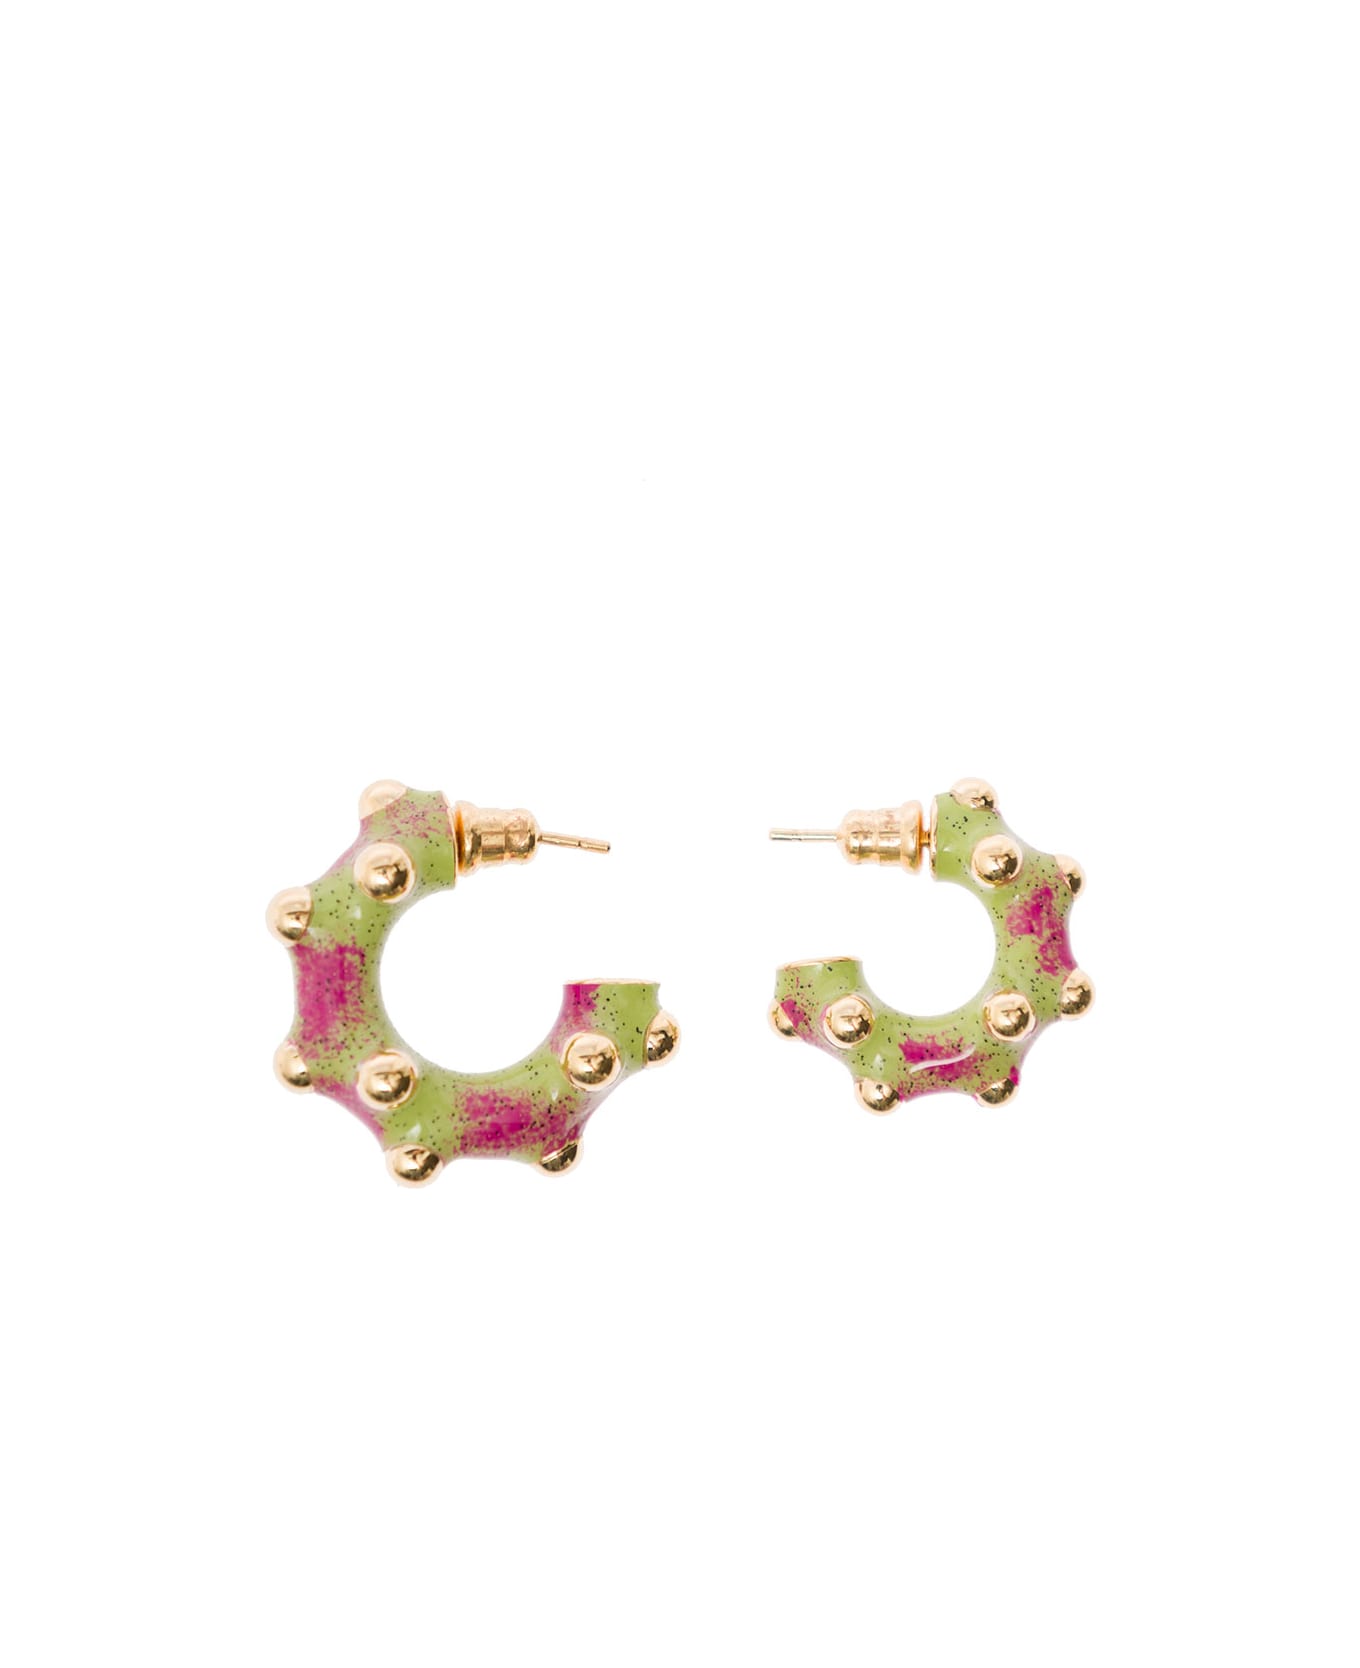 Panconesi Multicolor Asymmetric Earrings With Studs In 18k Gold Plated Brass Woman - Green